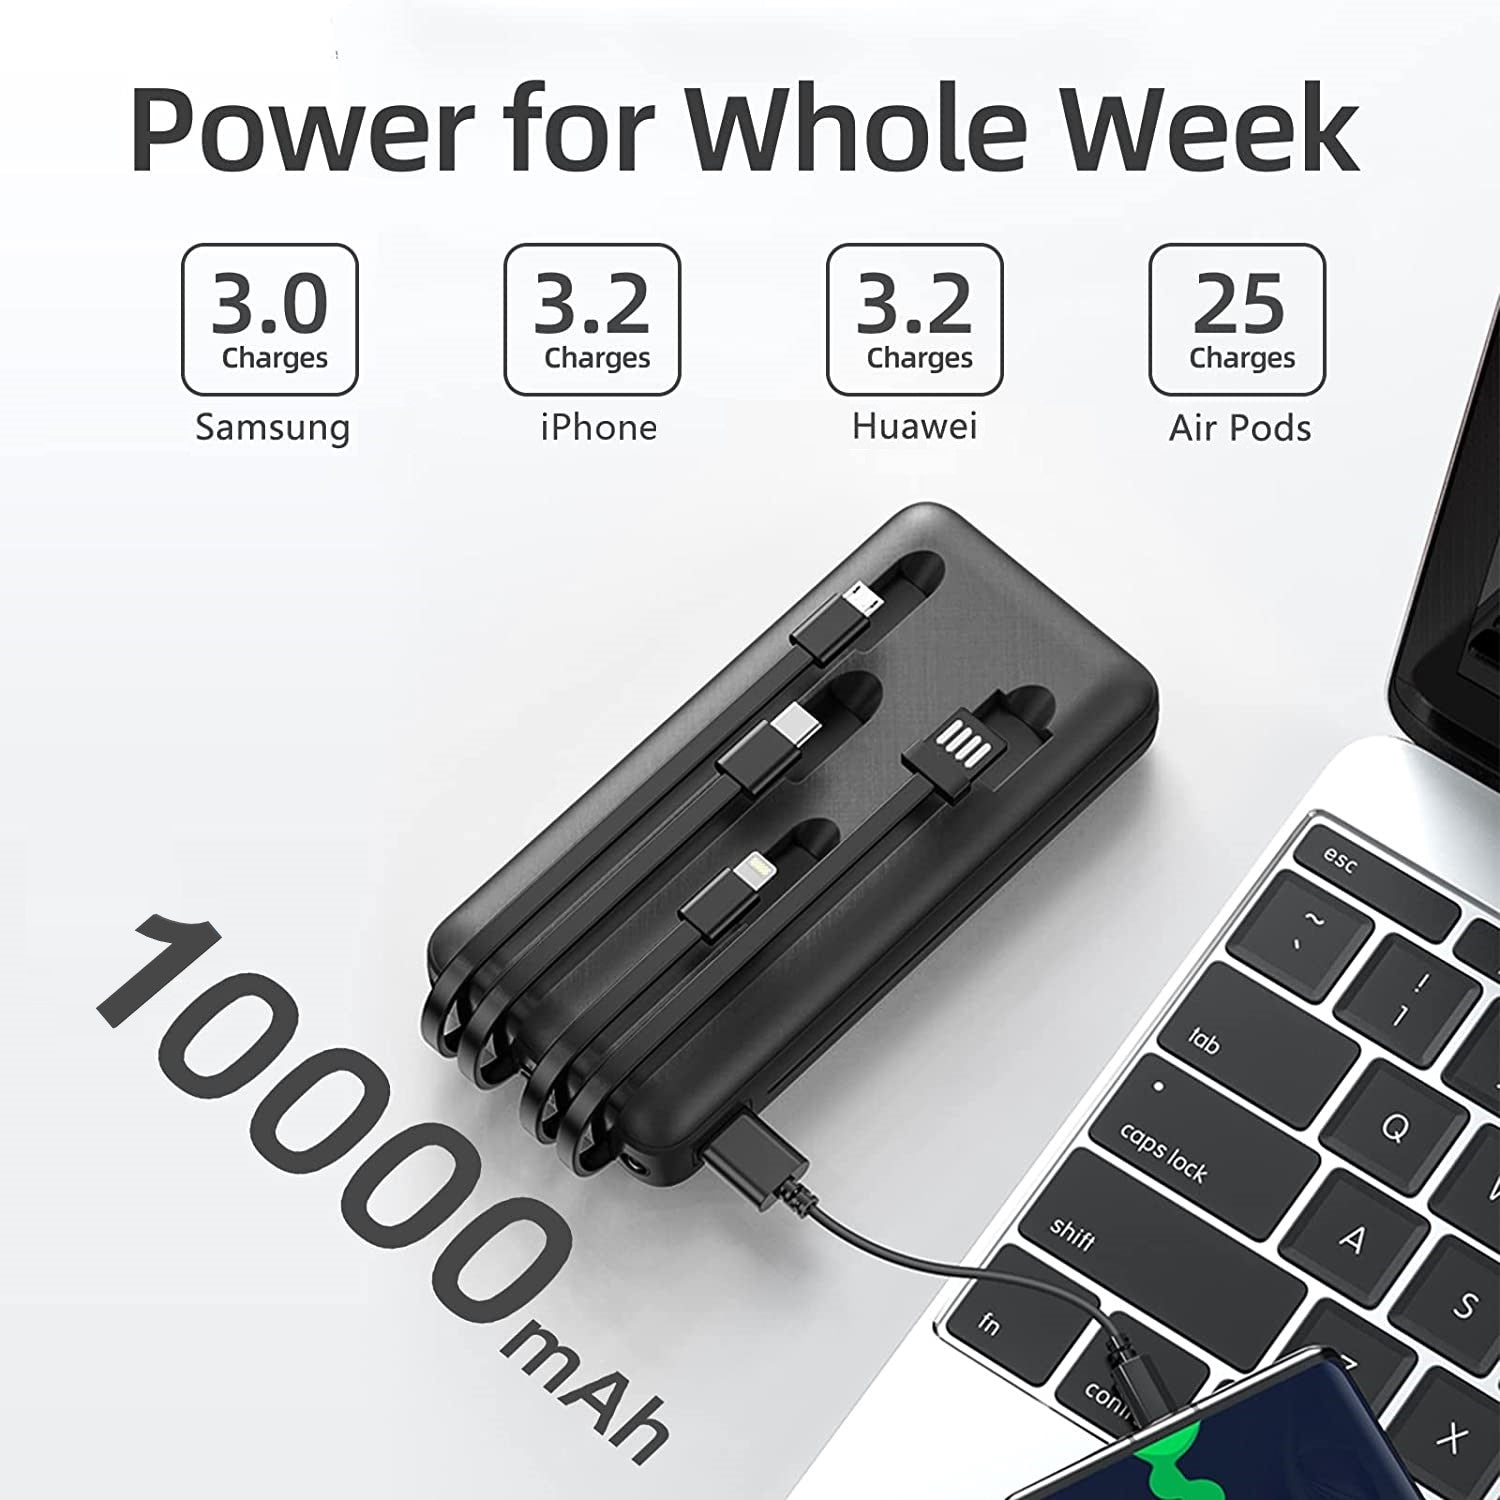 Digital display power bank comes with 4-wire 10000 mAh Capacity